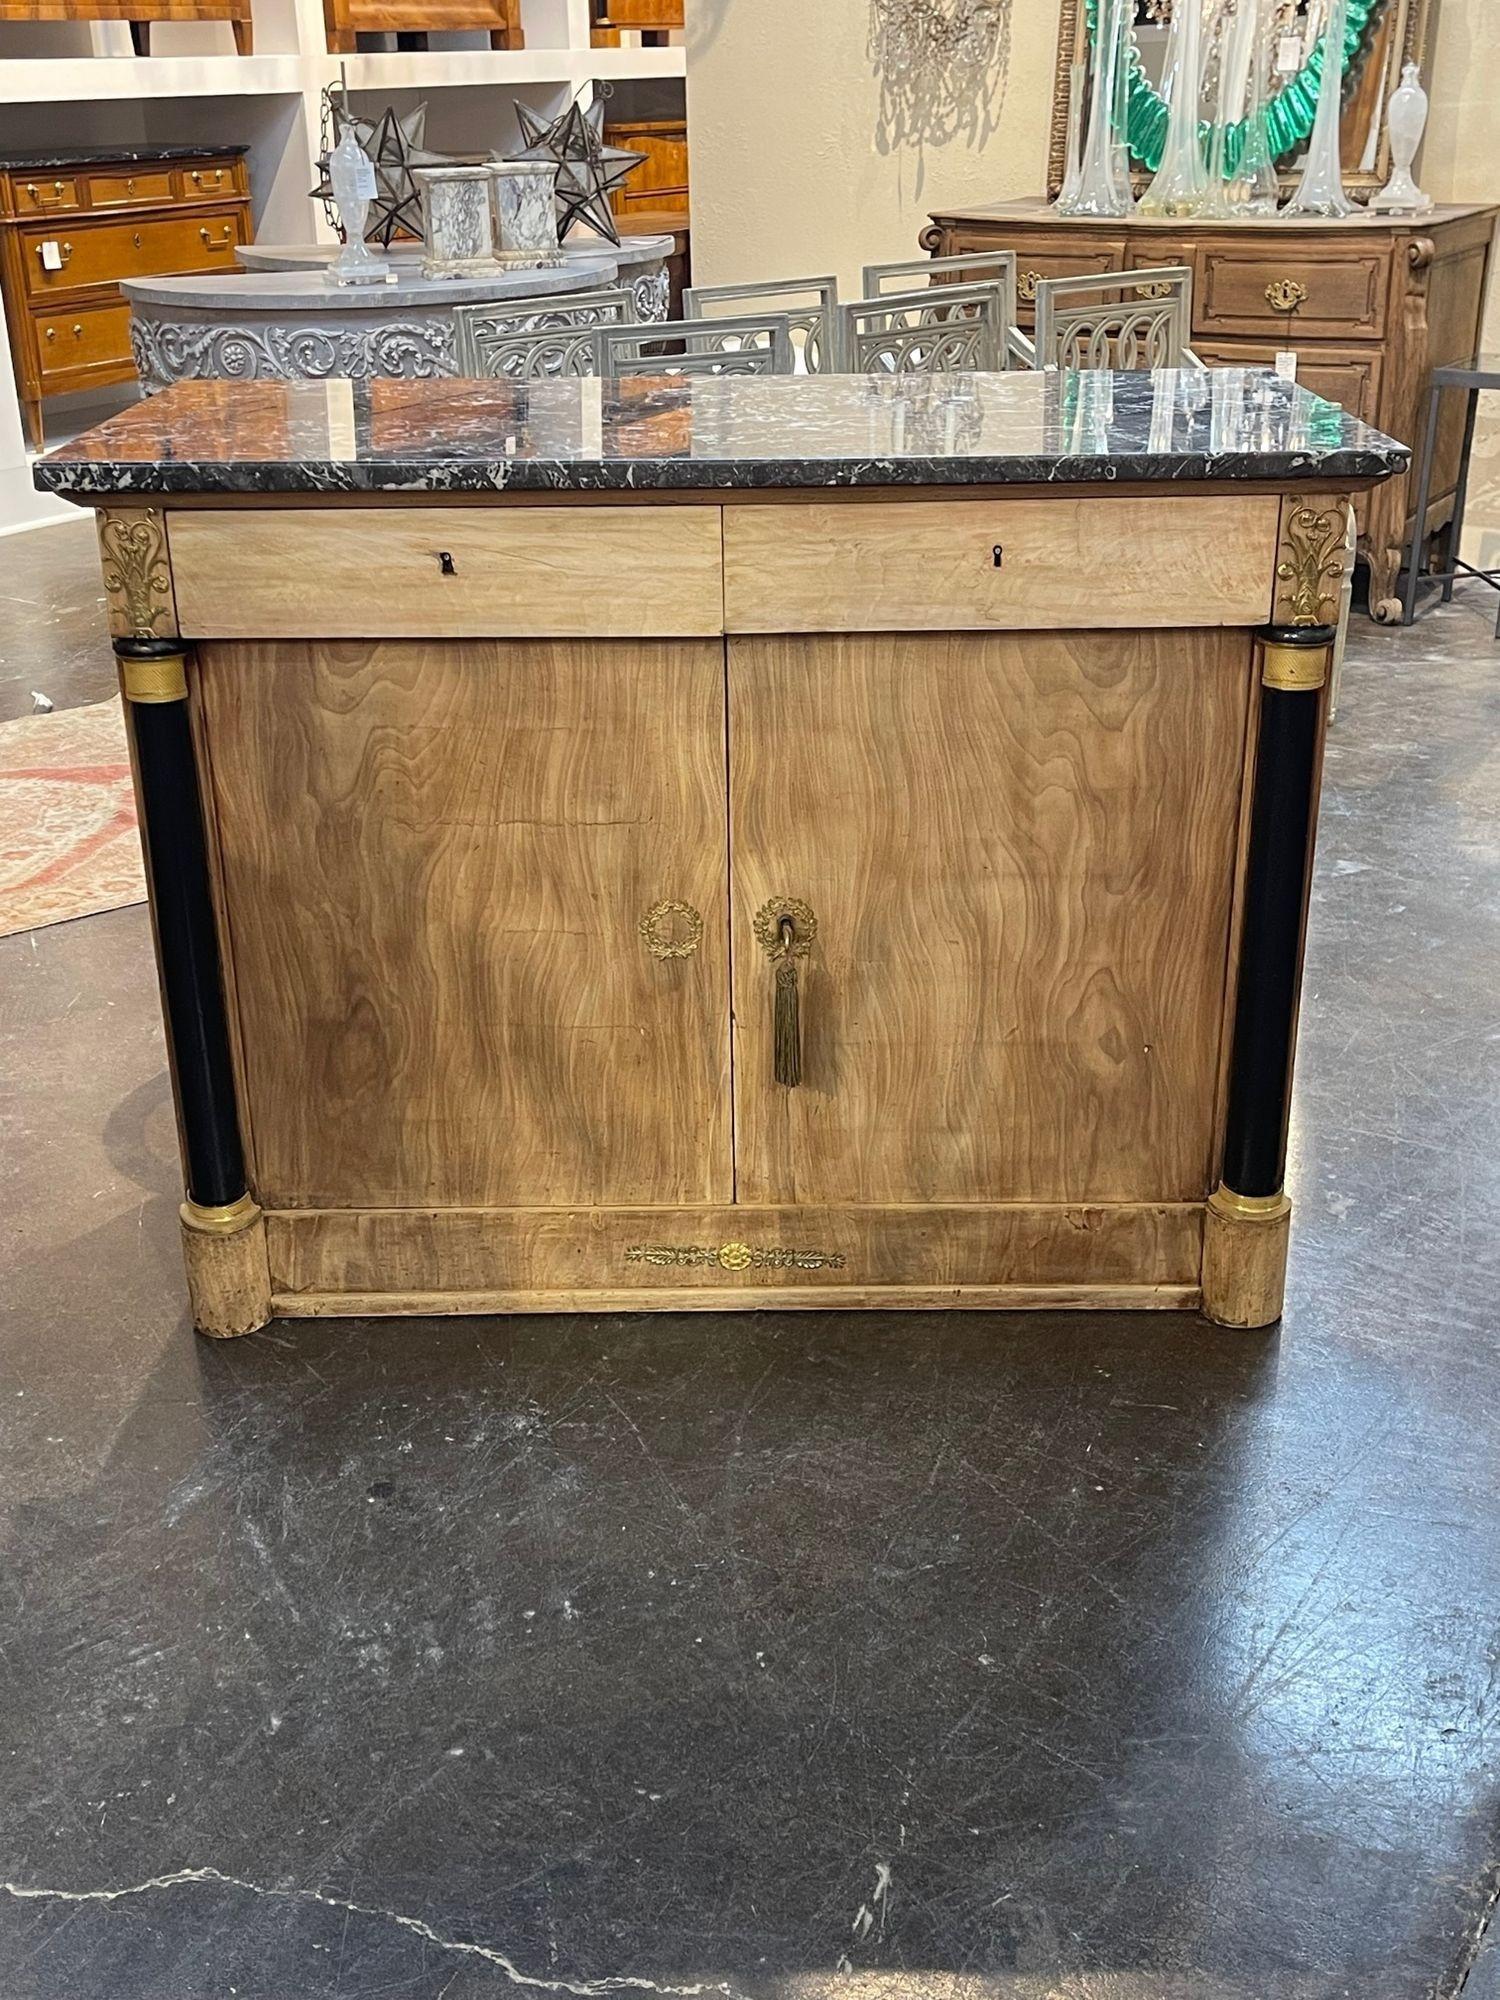 Elegant 19th century Empire style carved and bleached mahogany buffet with grey marble top. This piece has beautiful wood grain and nice storage inside. Lovely!!